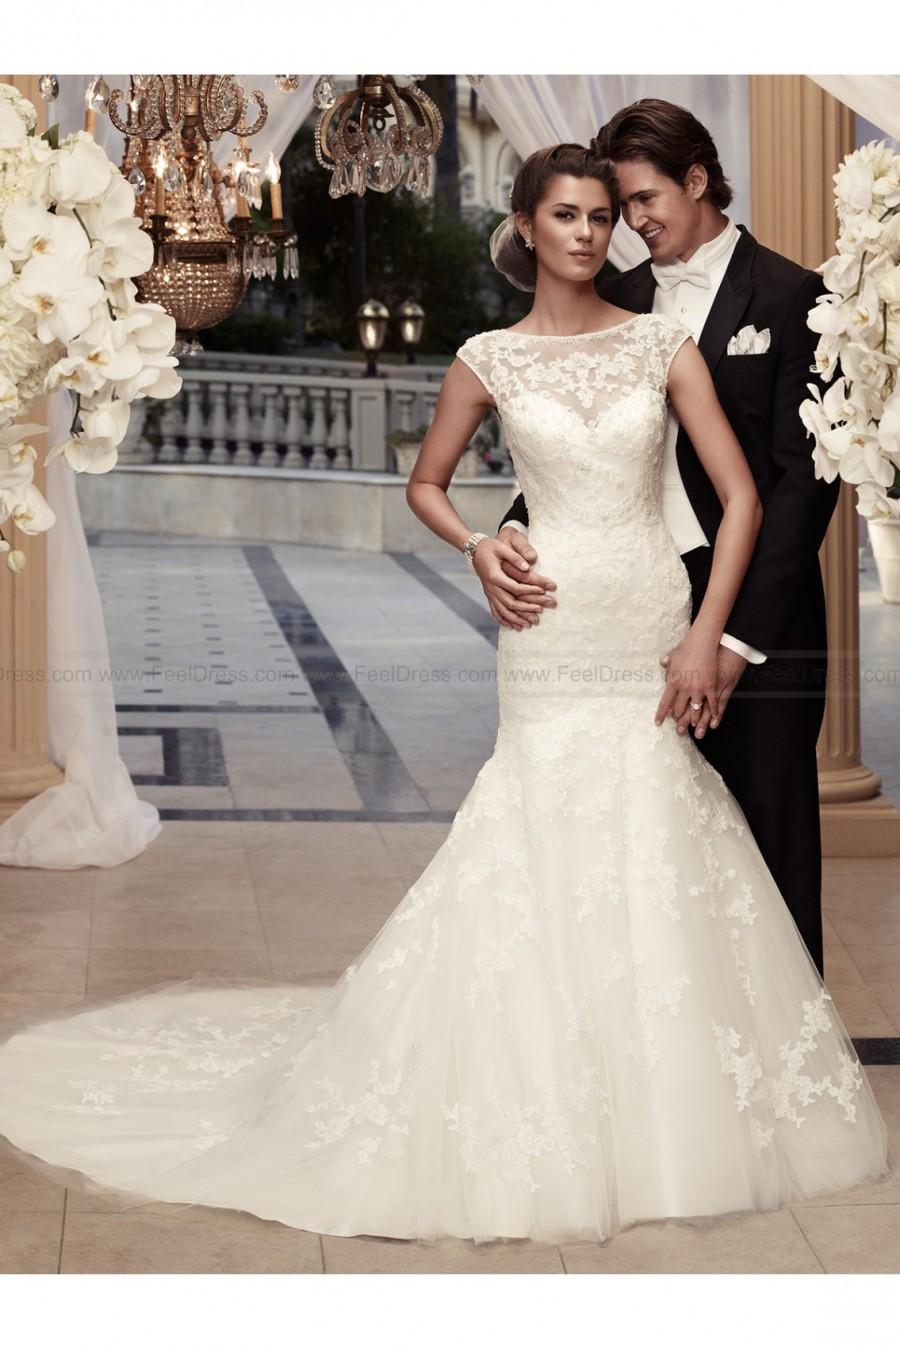 Wedding - Outstanding Fit And Flare Bridal Dress By Casablanca 2110